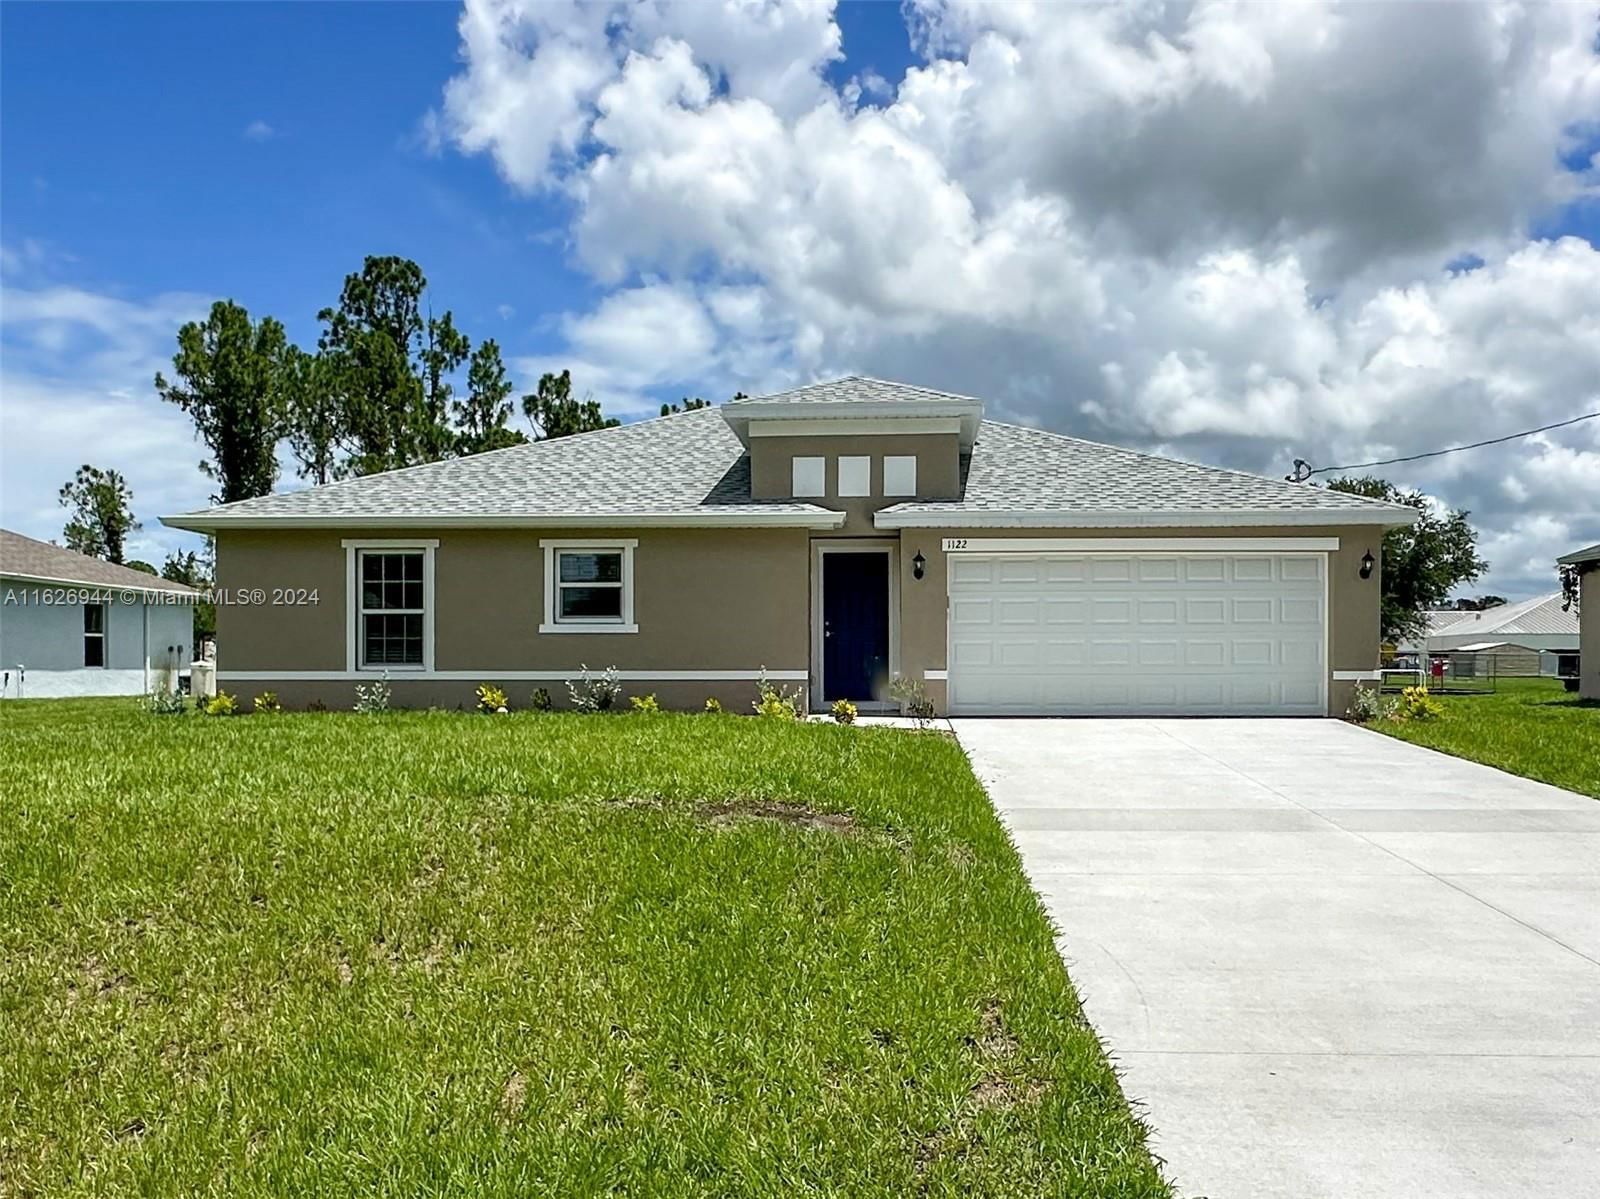 Real estate property located at 1122 KNOTTY PINE AVENUE, Sarasota County, Port Charlotte Sub, North Port, FL